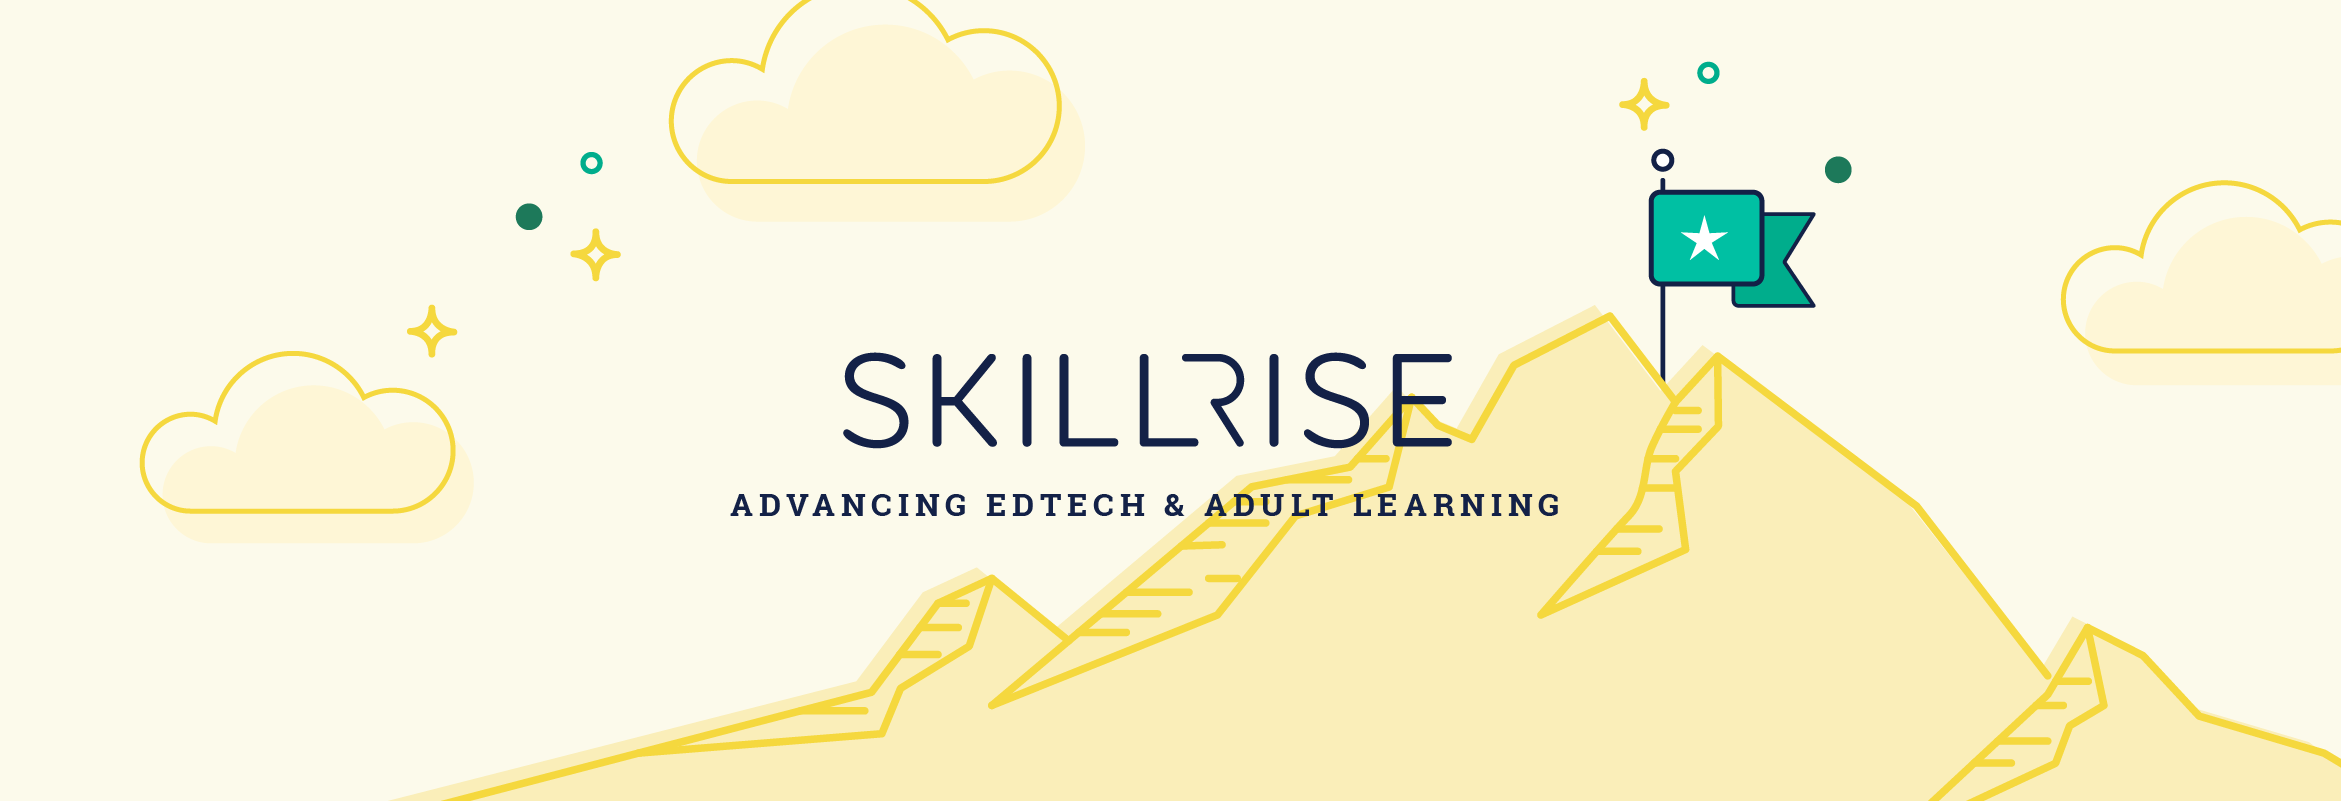 SkillRise is a way to meet goals for upskilling